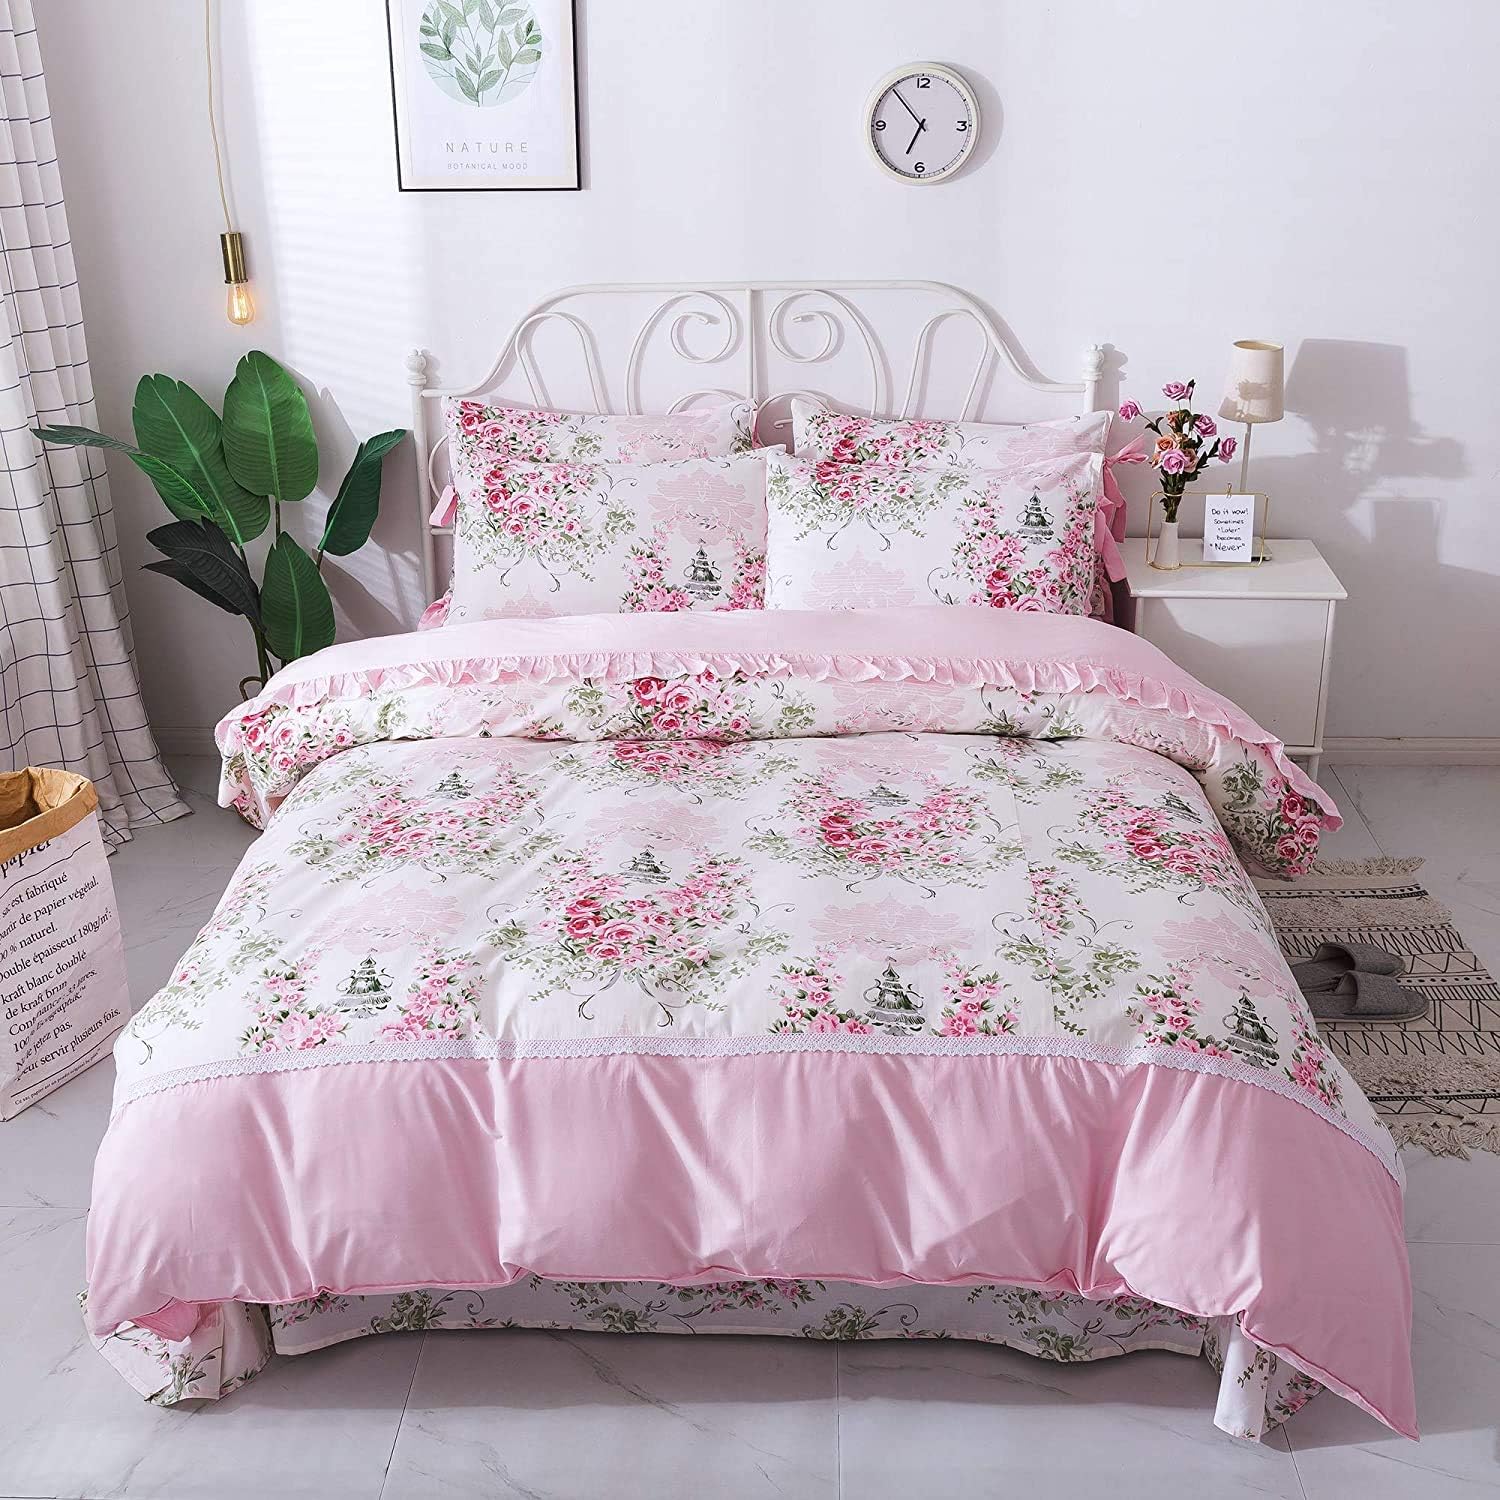 FADFAY Rosette Floral Duvet Cover Sweet Pink Girls Bedding Set 100% Cotton Ultra Soft Bed Sheets Set,5Pcs (1 Duvet Cover +1 Fitted Sheet+ 1 Flat Sheet +2 Standard Pillowcases), Twin Size